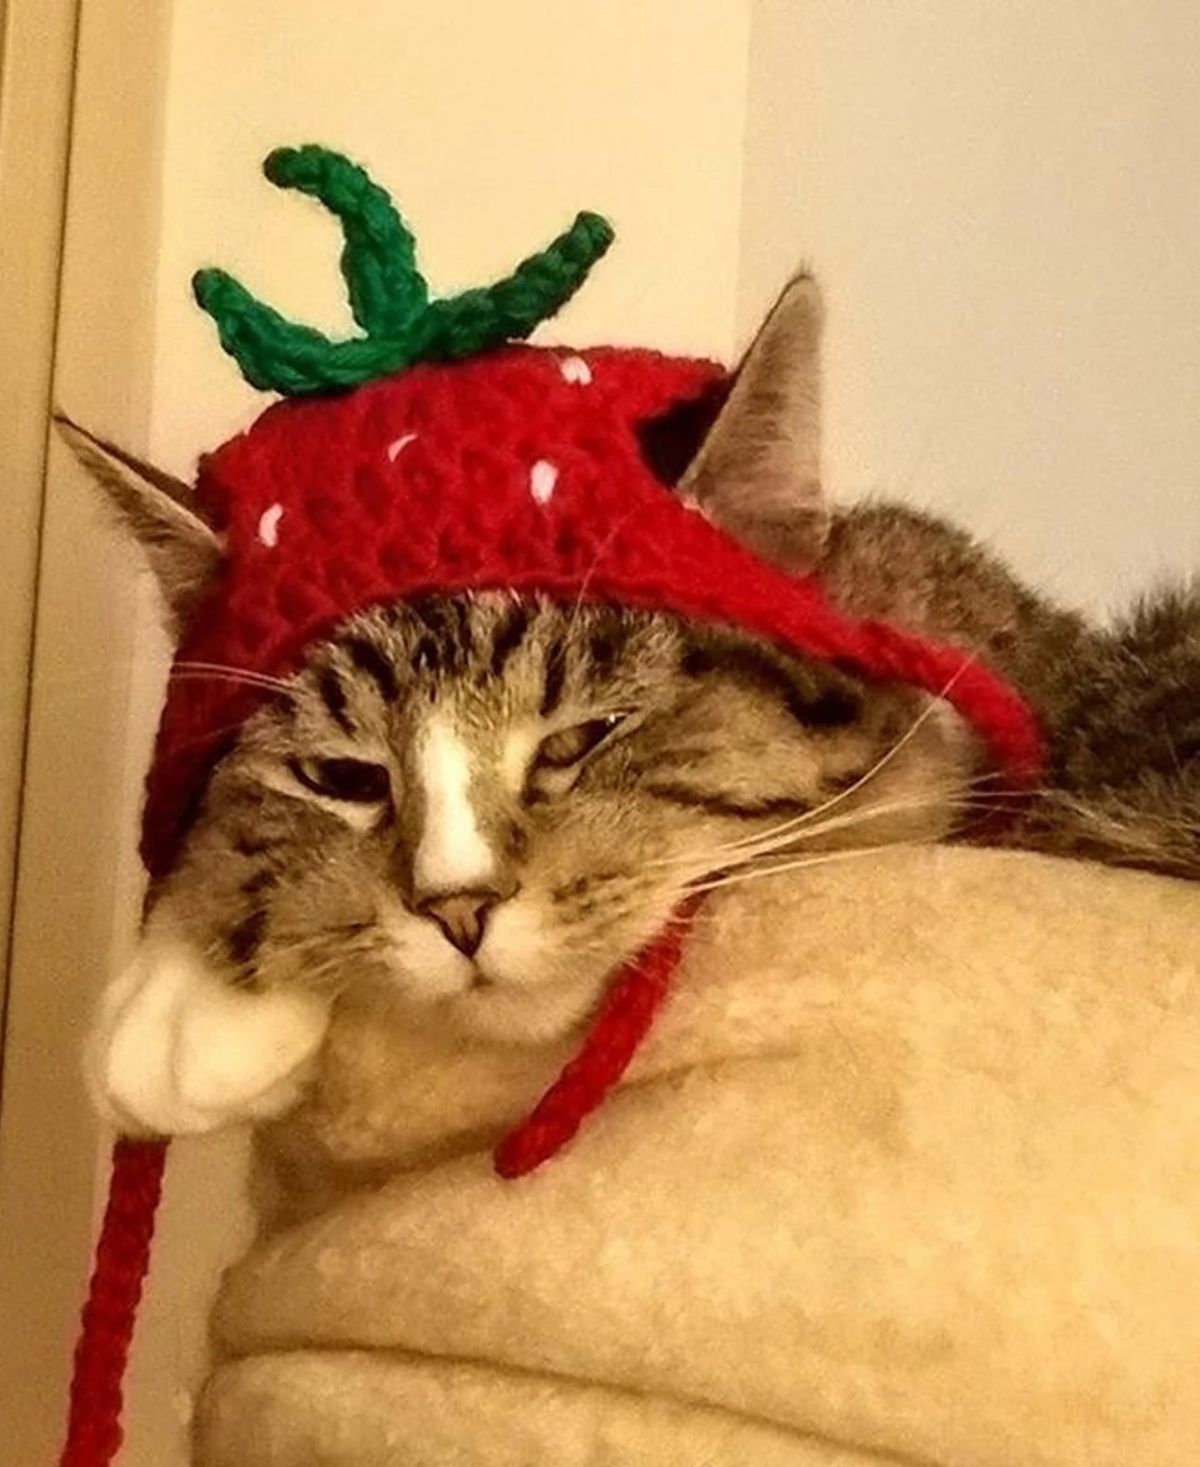 grey and white tabby cat wearing a red green and white strawberry crocheted hat